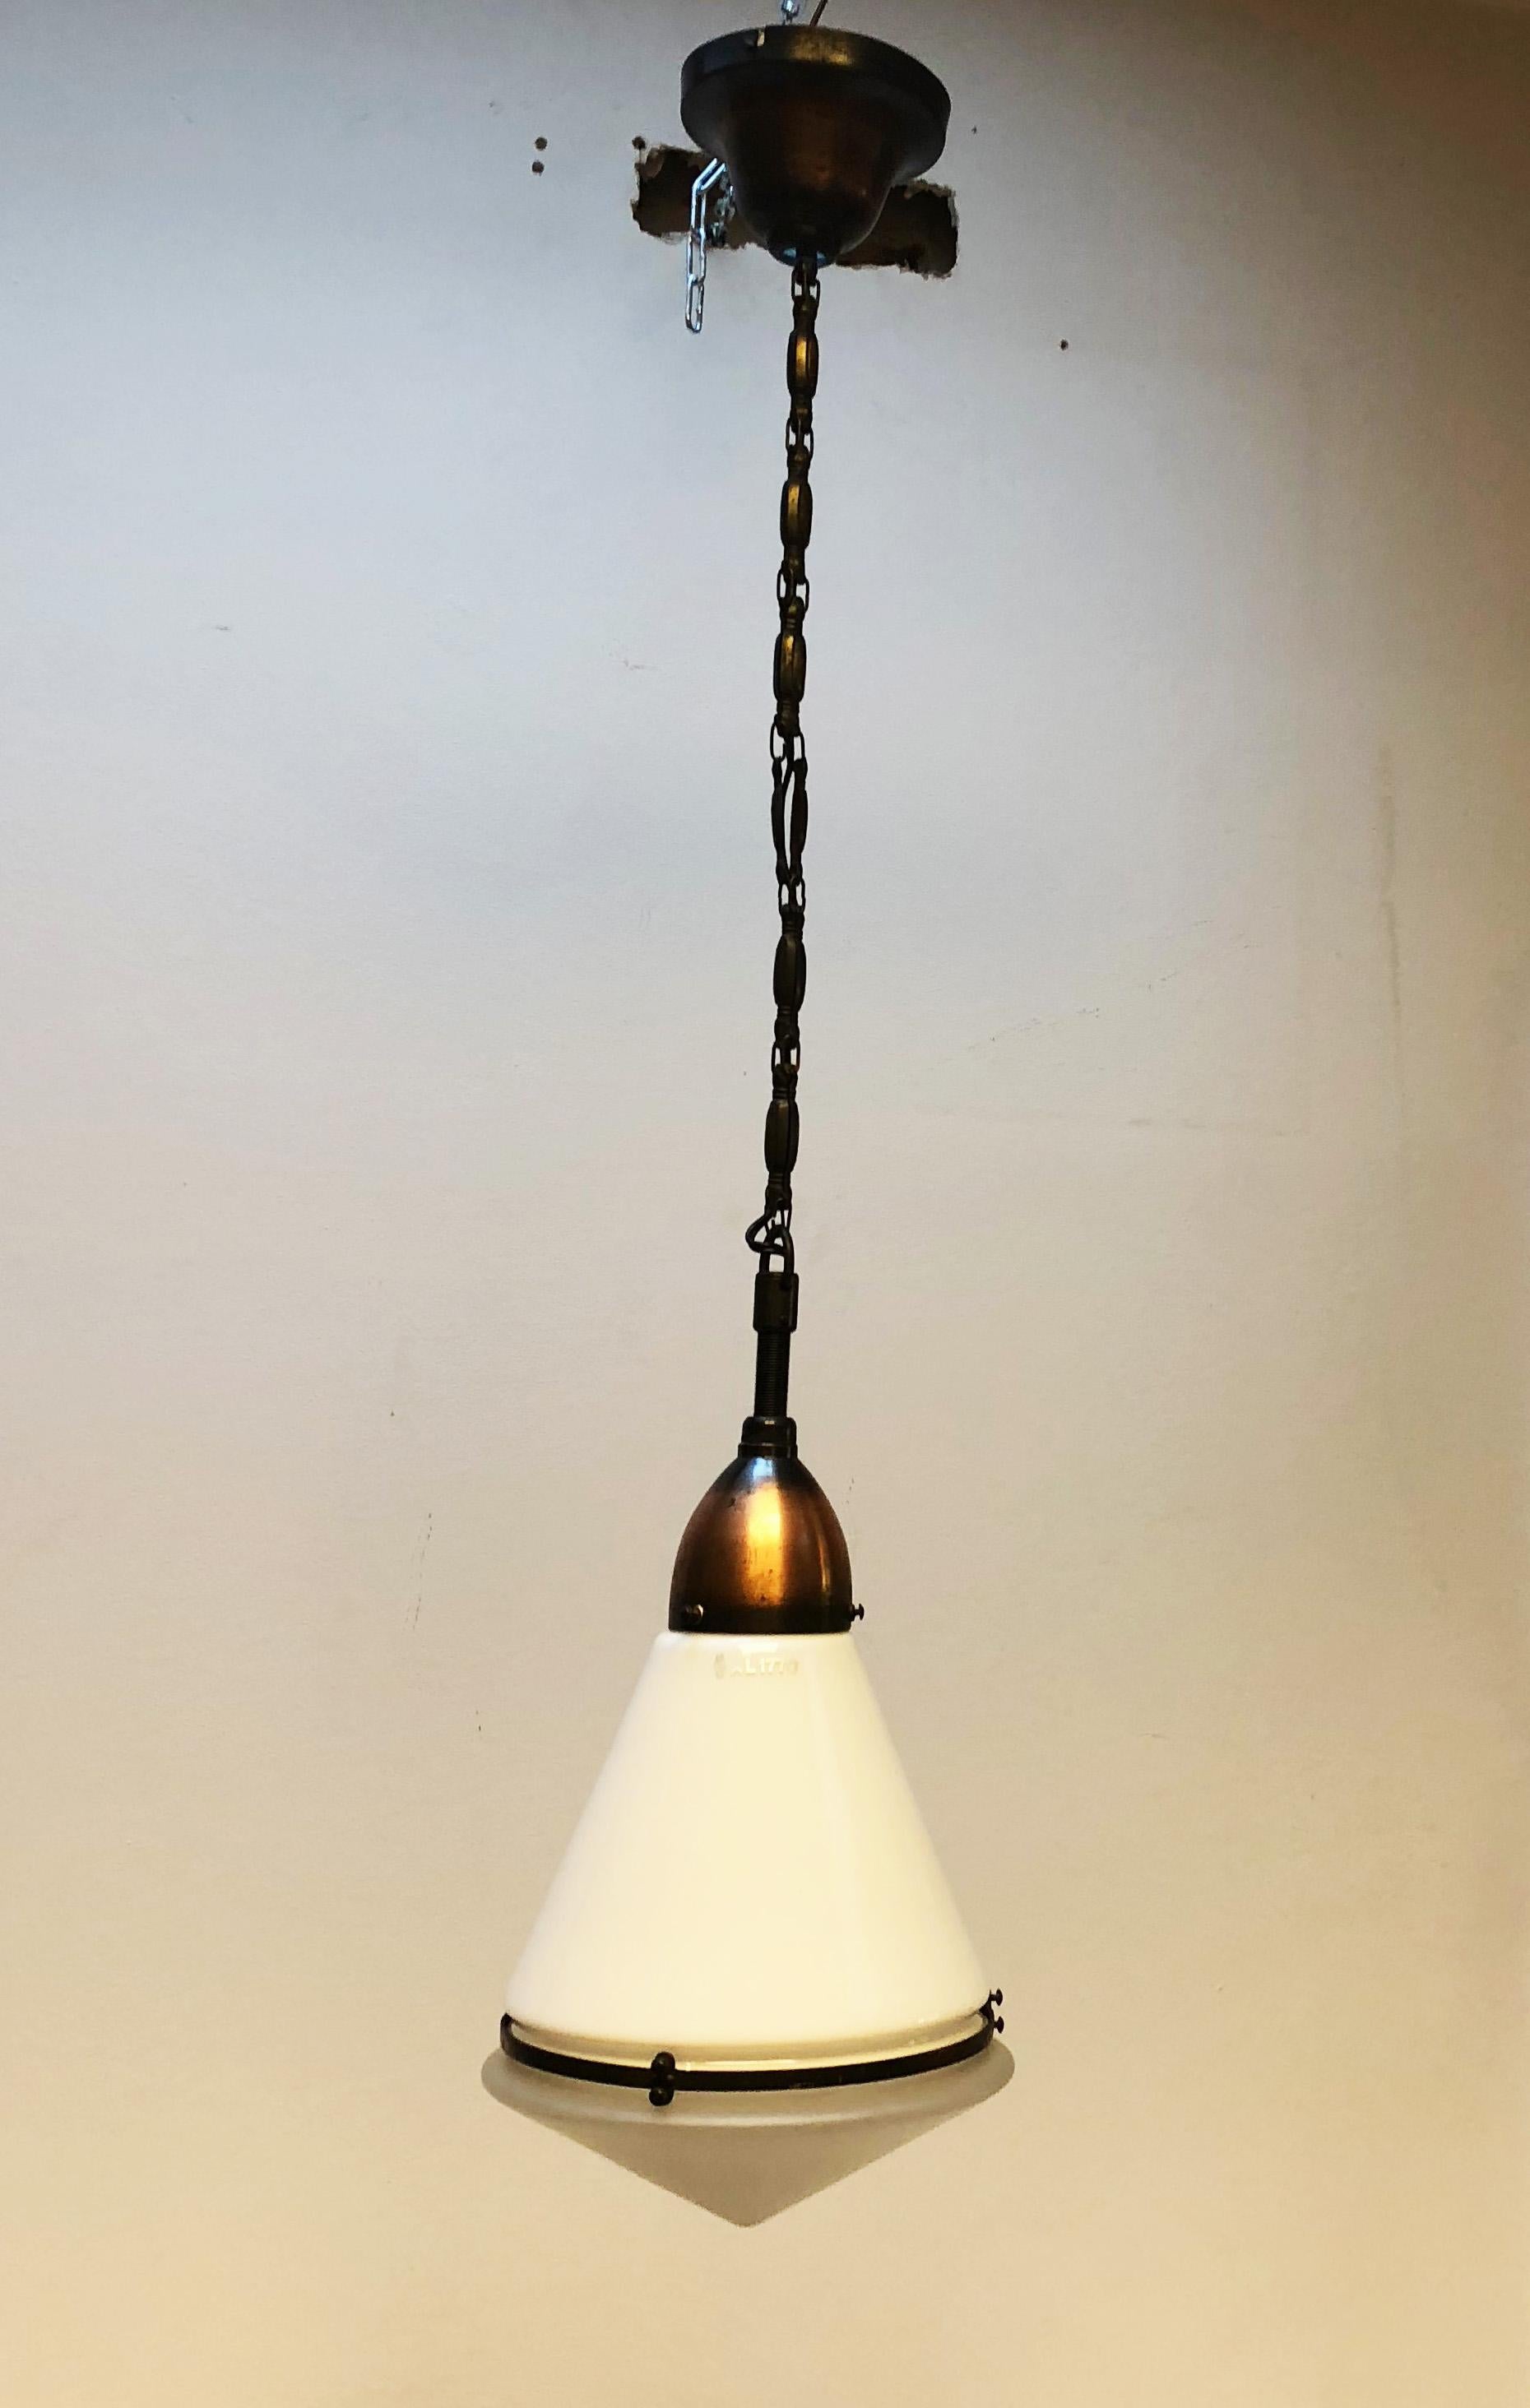 Early 20th Century Luzette Pendant by Peter Behrens for AEG